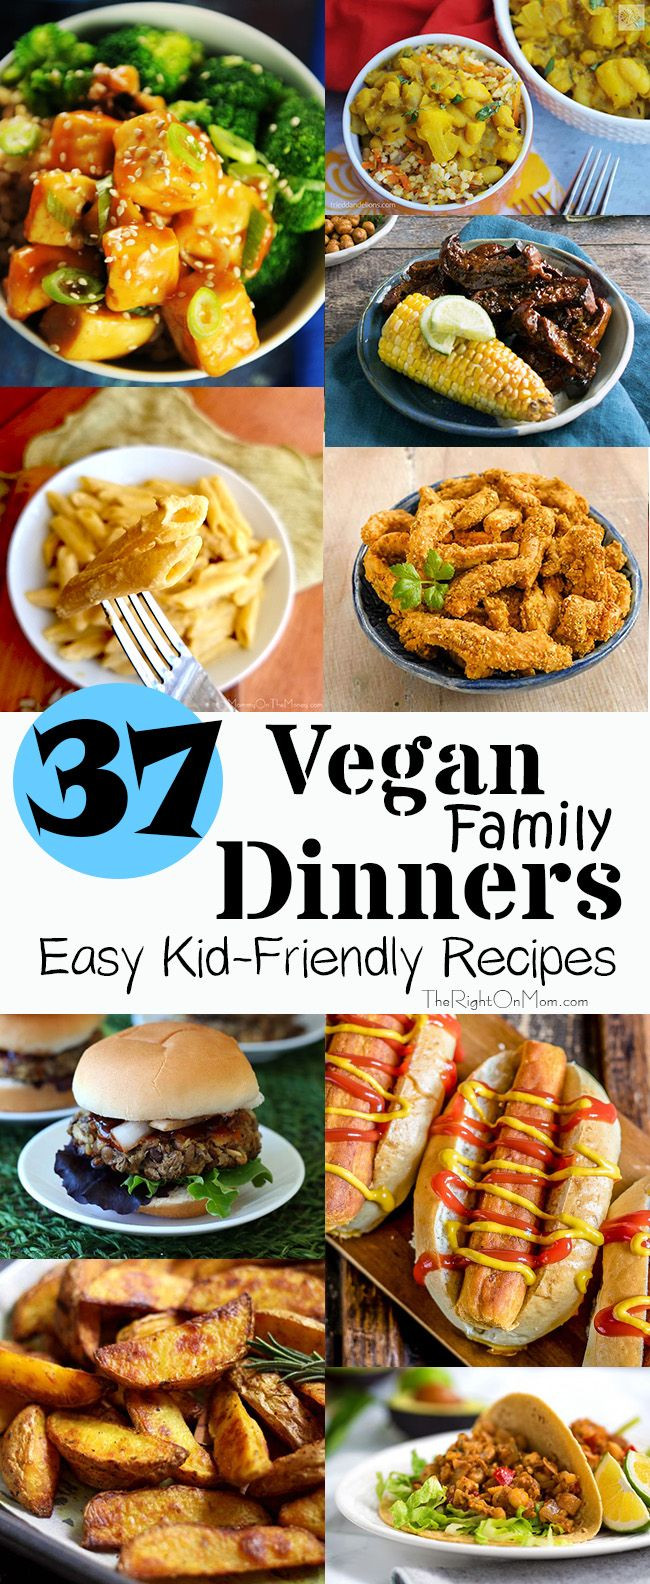 Plant Based Recipes For Picky Eaters
 37 Vegan Family Dinners Easy Kid Friendly Recipes